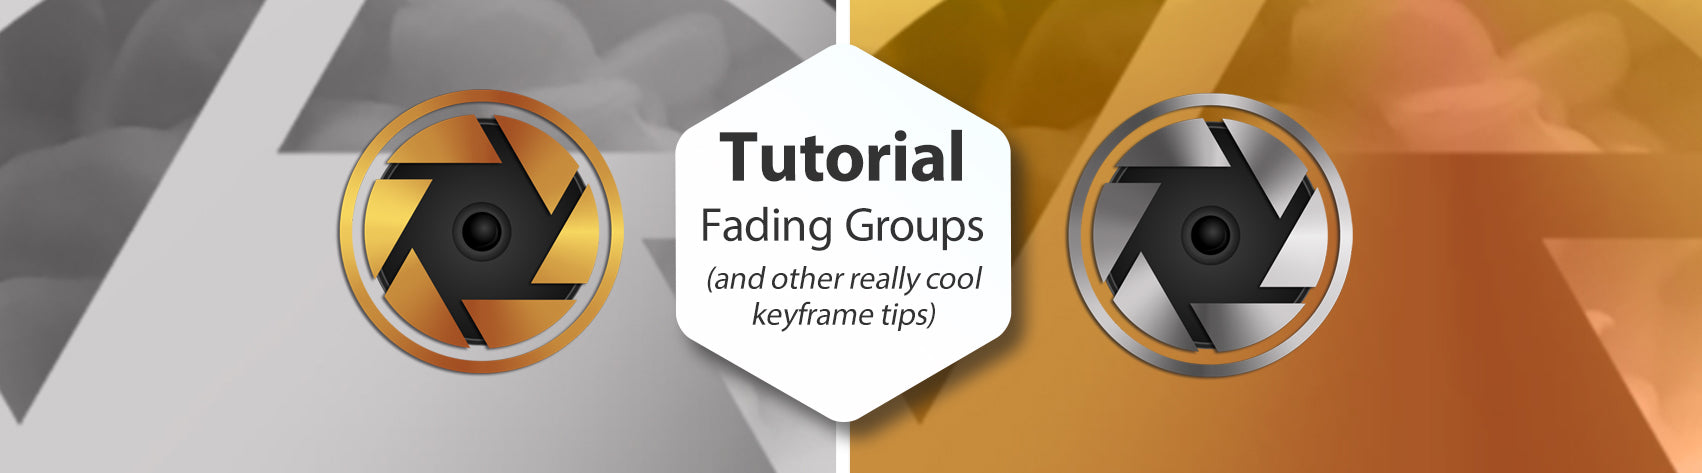 Lesson - Fading Groups (and other really cool keyframe tips)